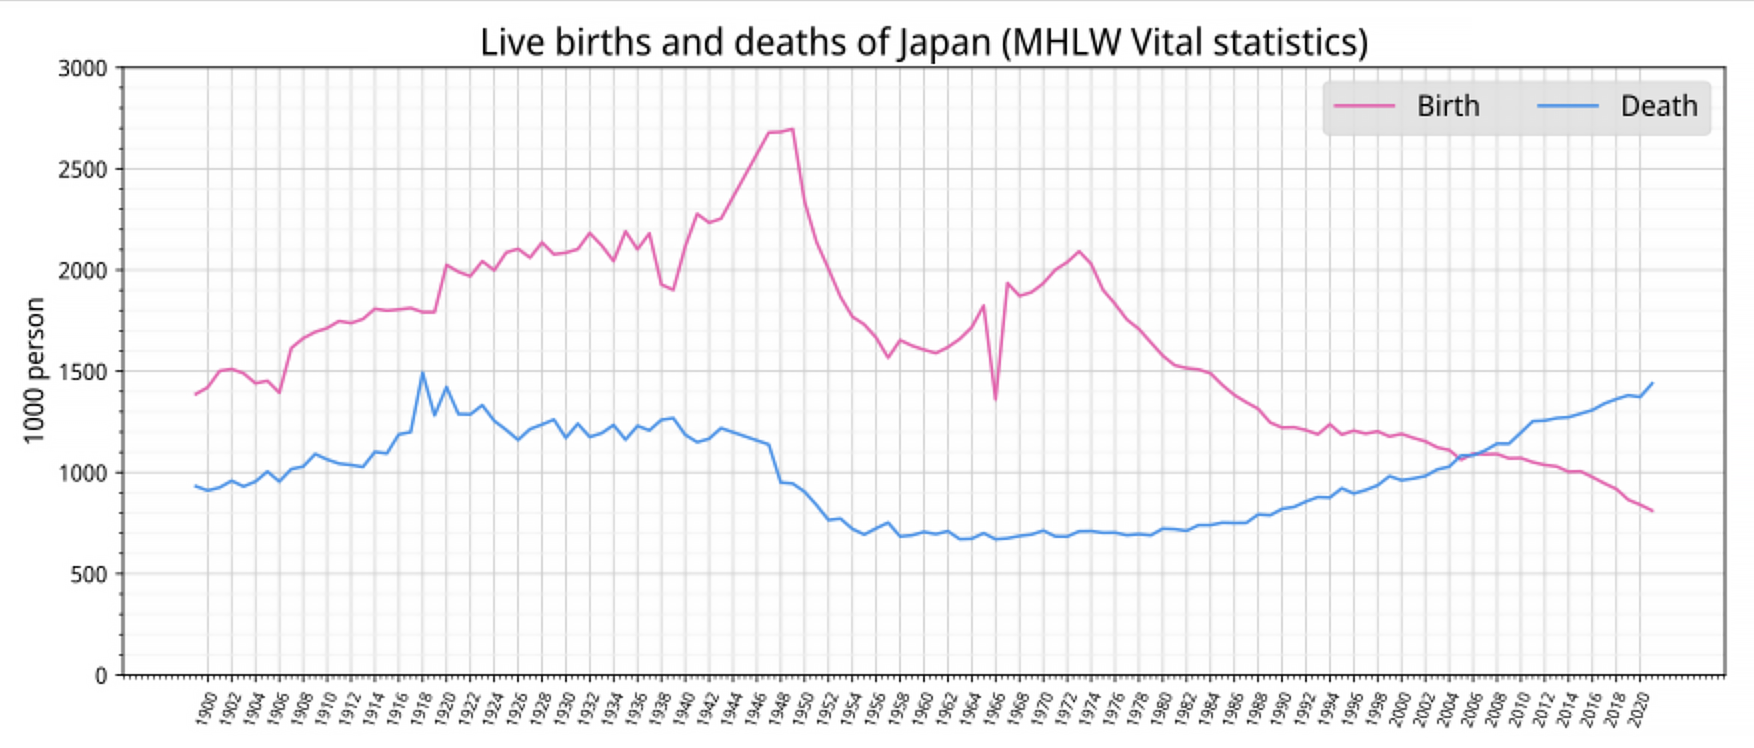 Live Births and Deaths of Japan